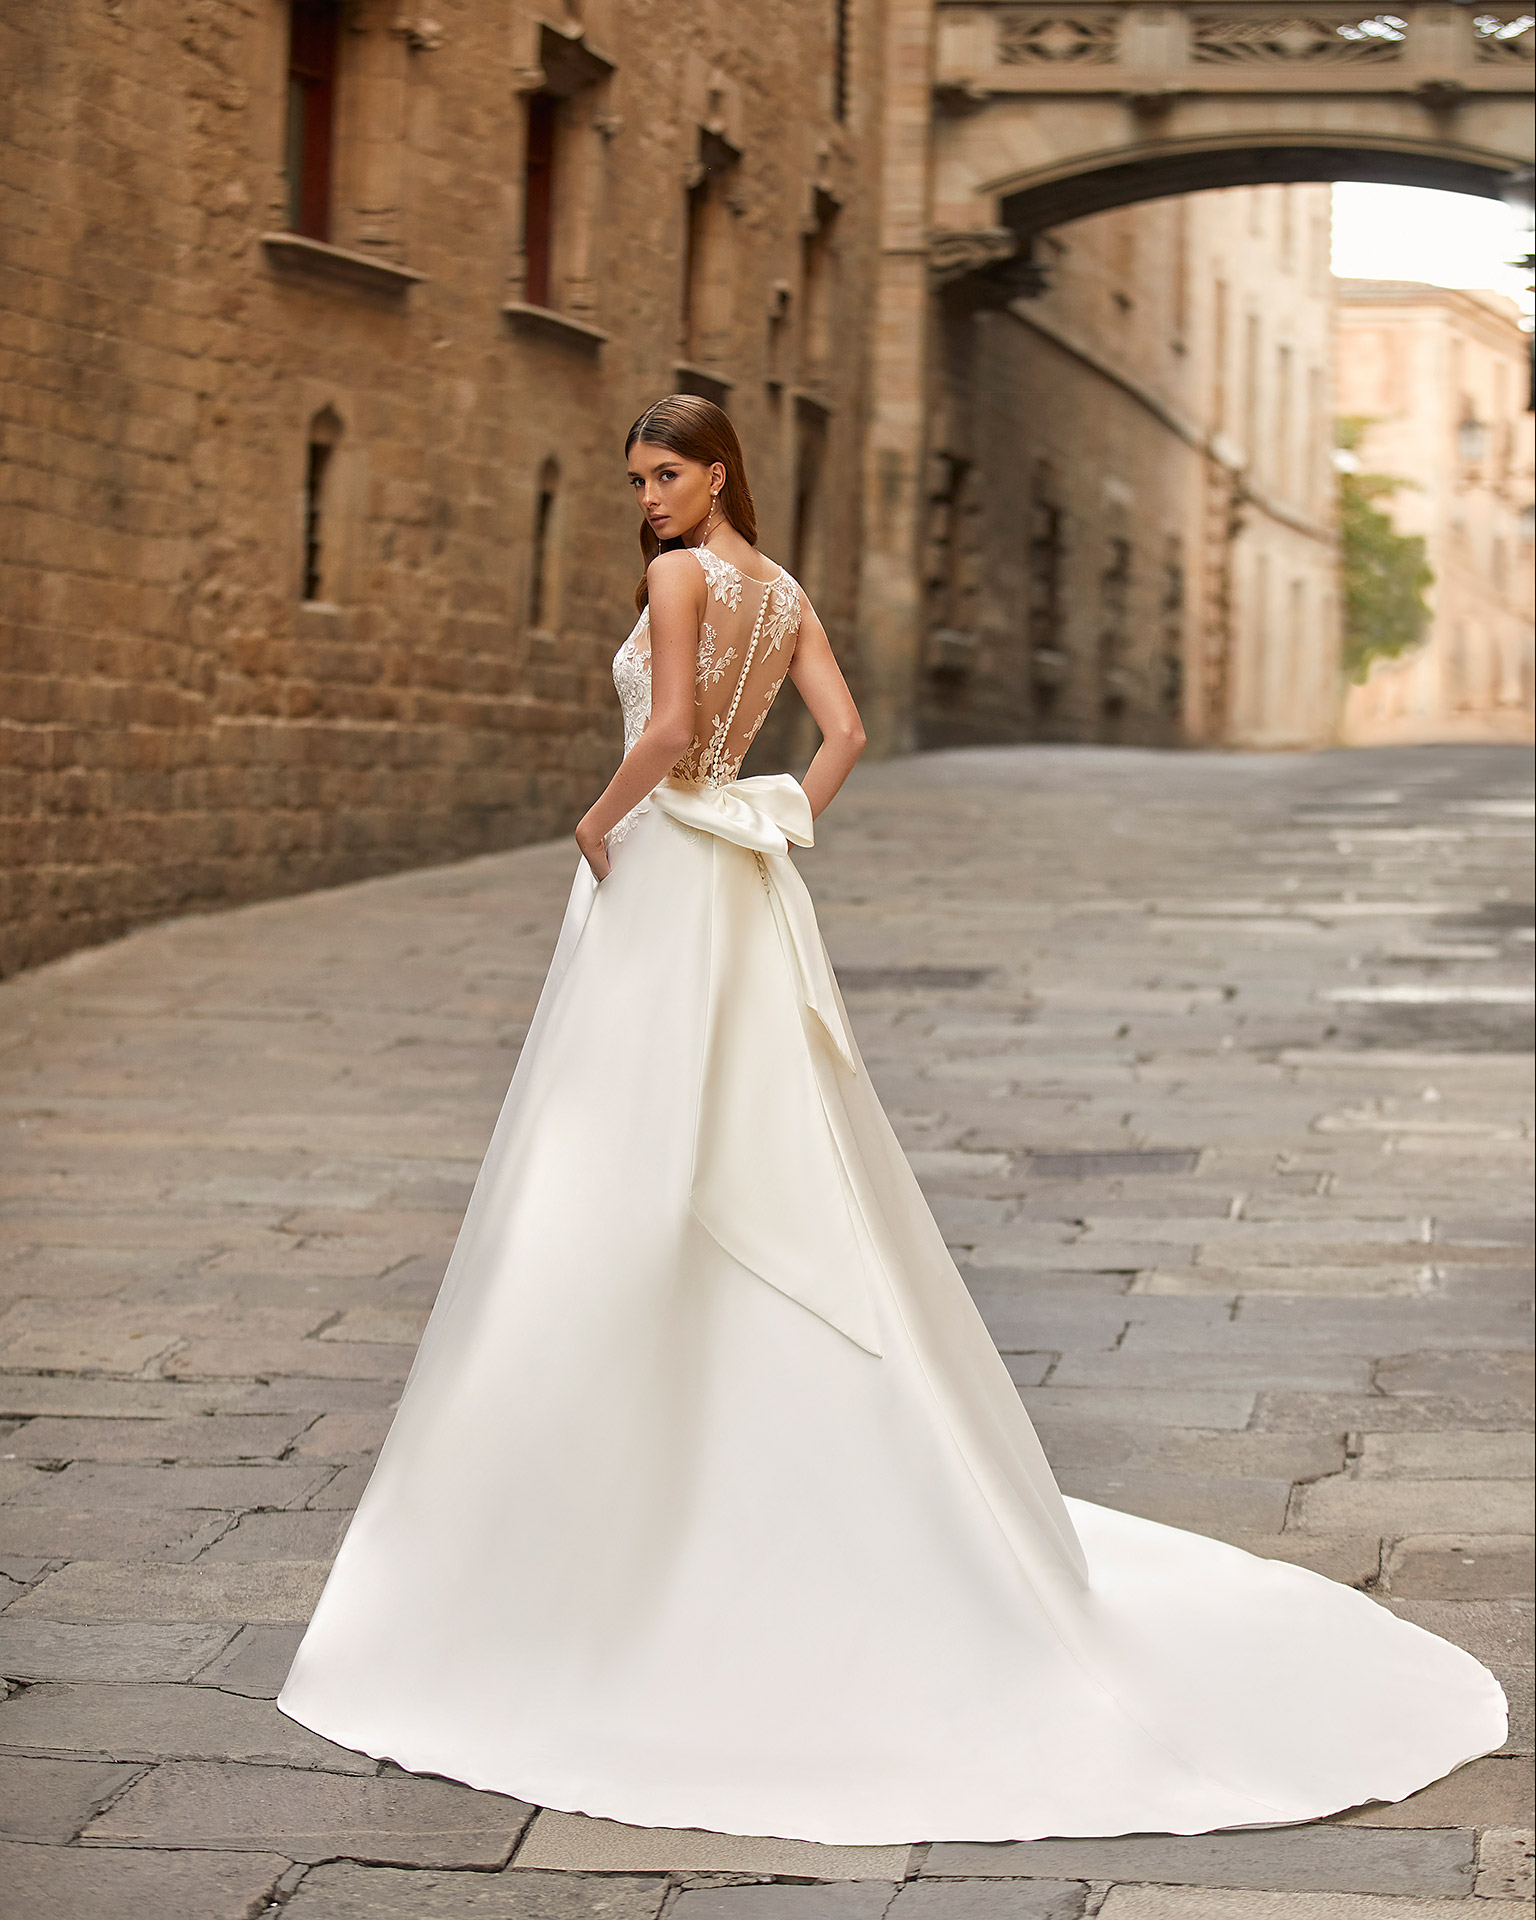 Elegant A-line wedding dress, made of matt Mikado, with a sheath-style skirt with pockets; with a deep-plunge neckline with delicate beadwork detail, and an illusion lace button-up back. Delicate Luna Novias look made of matt Mikado combined with lace. LUNA_NOVIAS.